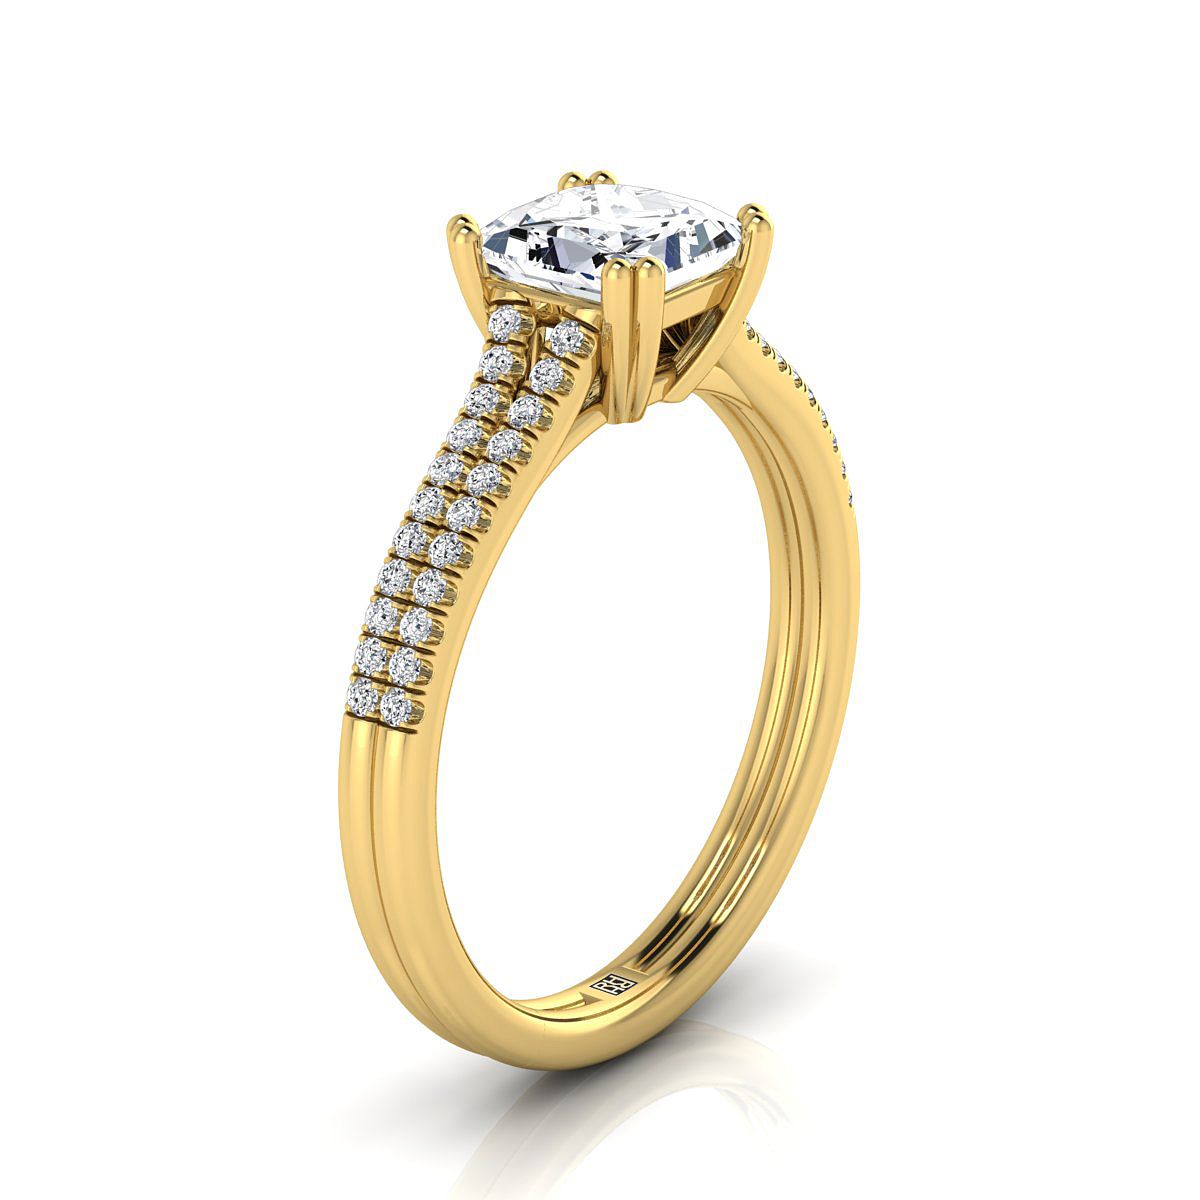 18K Yellow Gold Princess Cut Diamond Double Row Double Prong French Pave Engagement Ring -1/6ctw